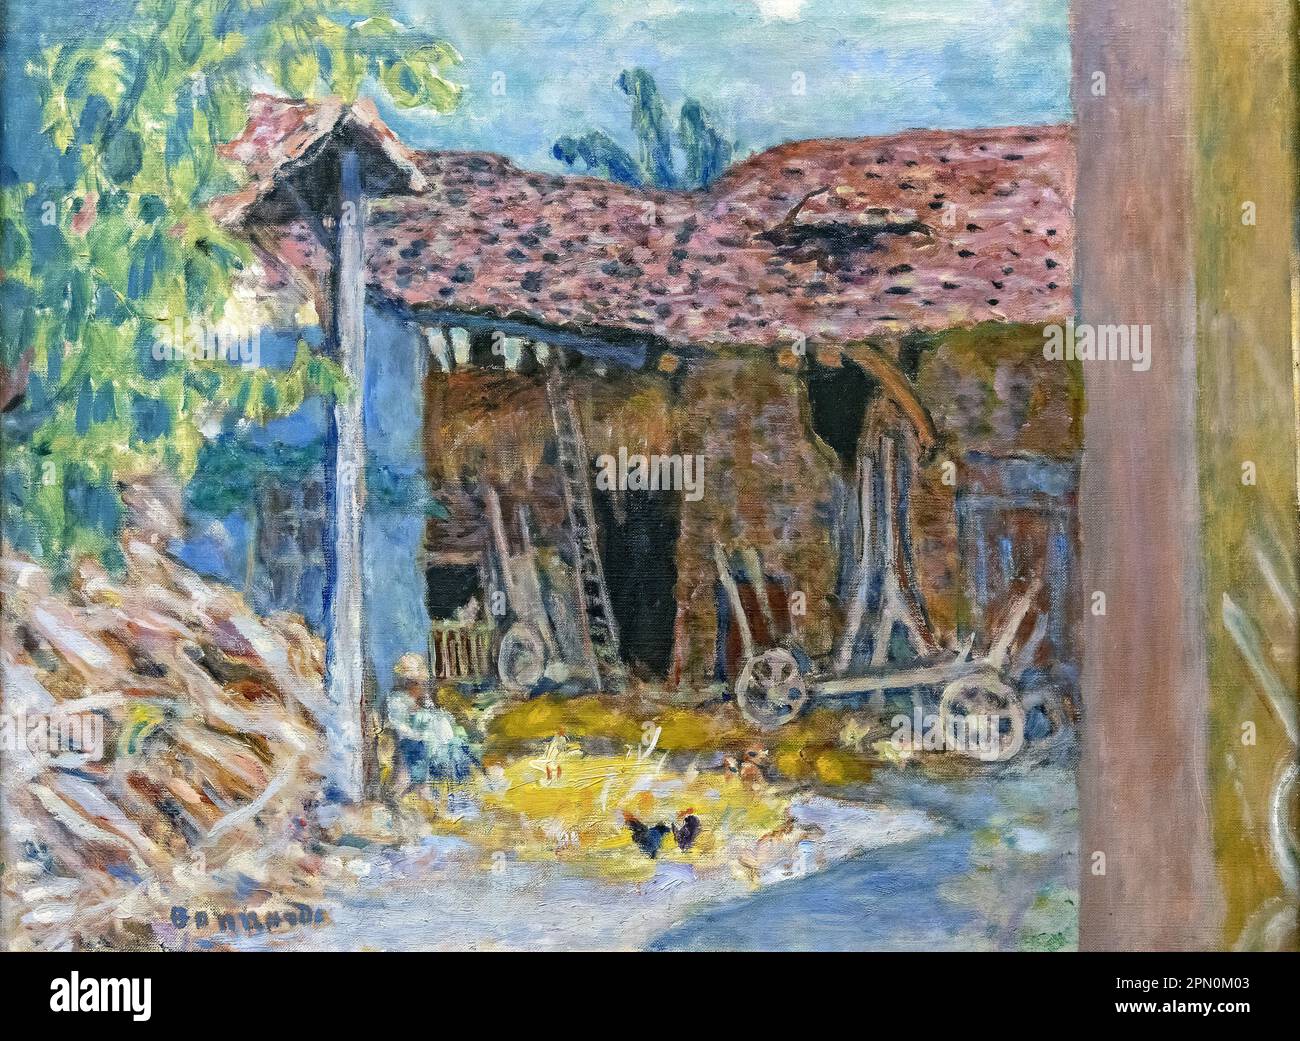 La Grange (1919) painted by the French post-impressionist painter Pierre Bonnard Stock Photo